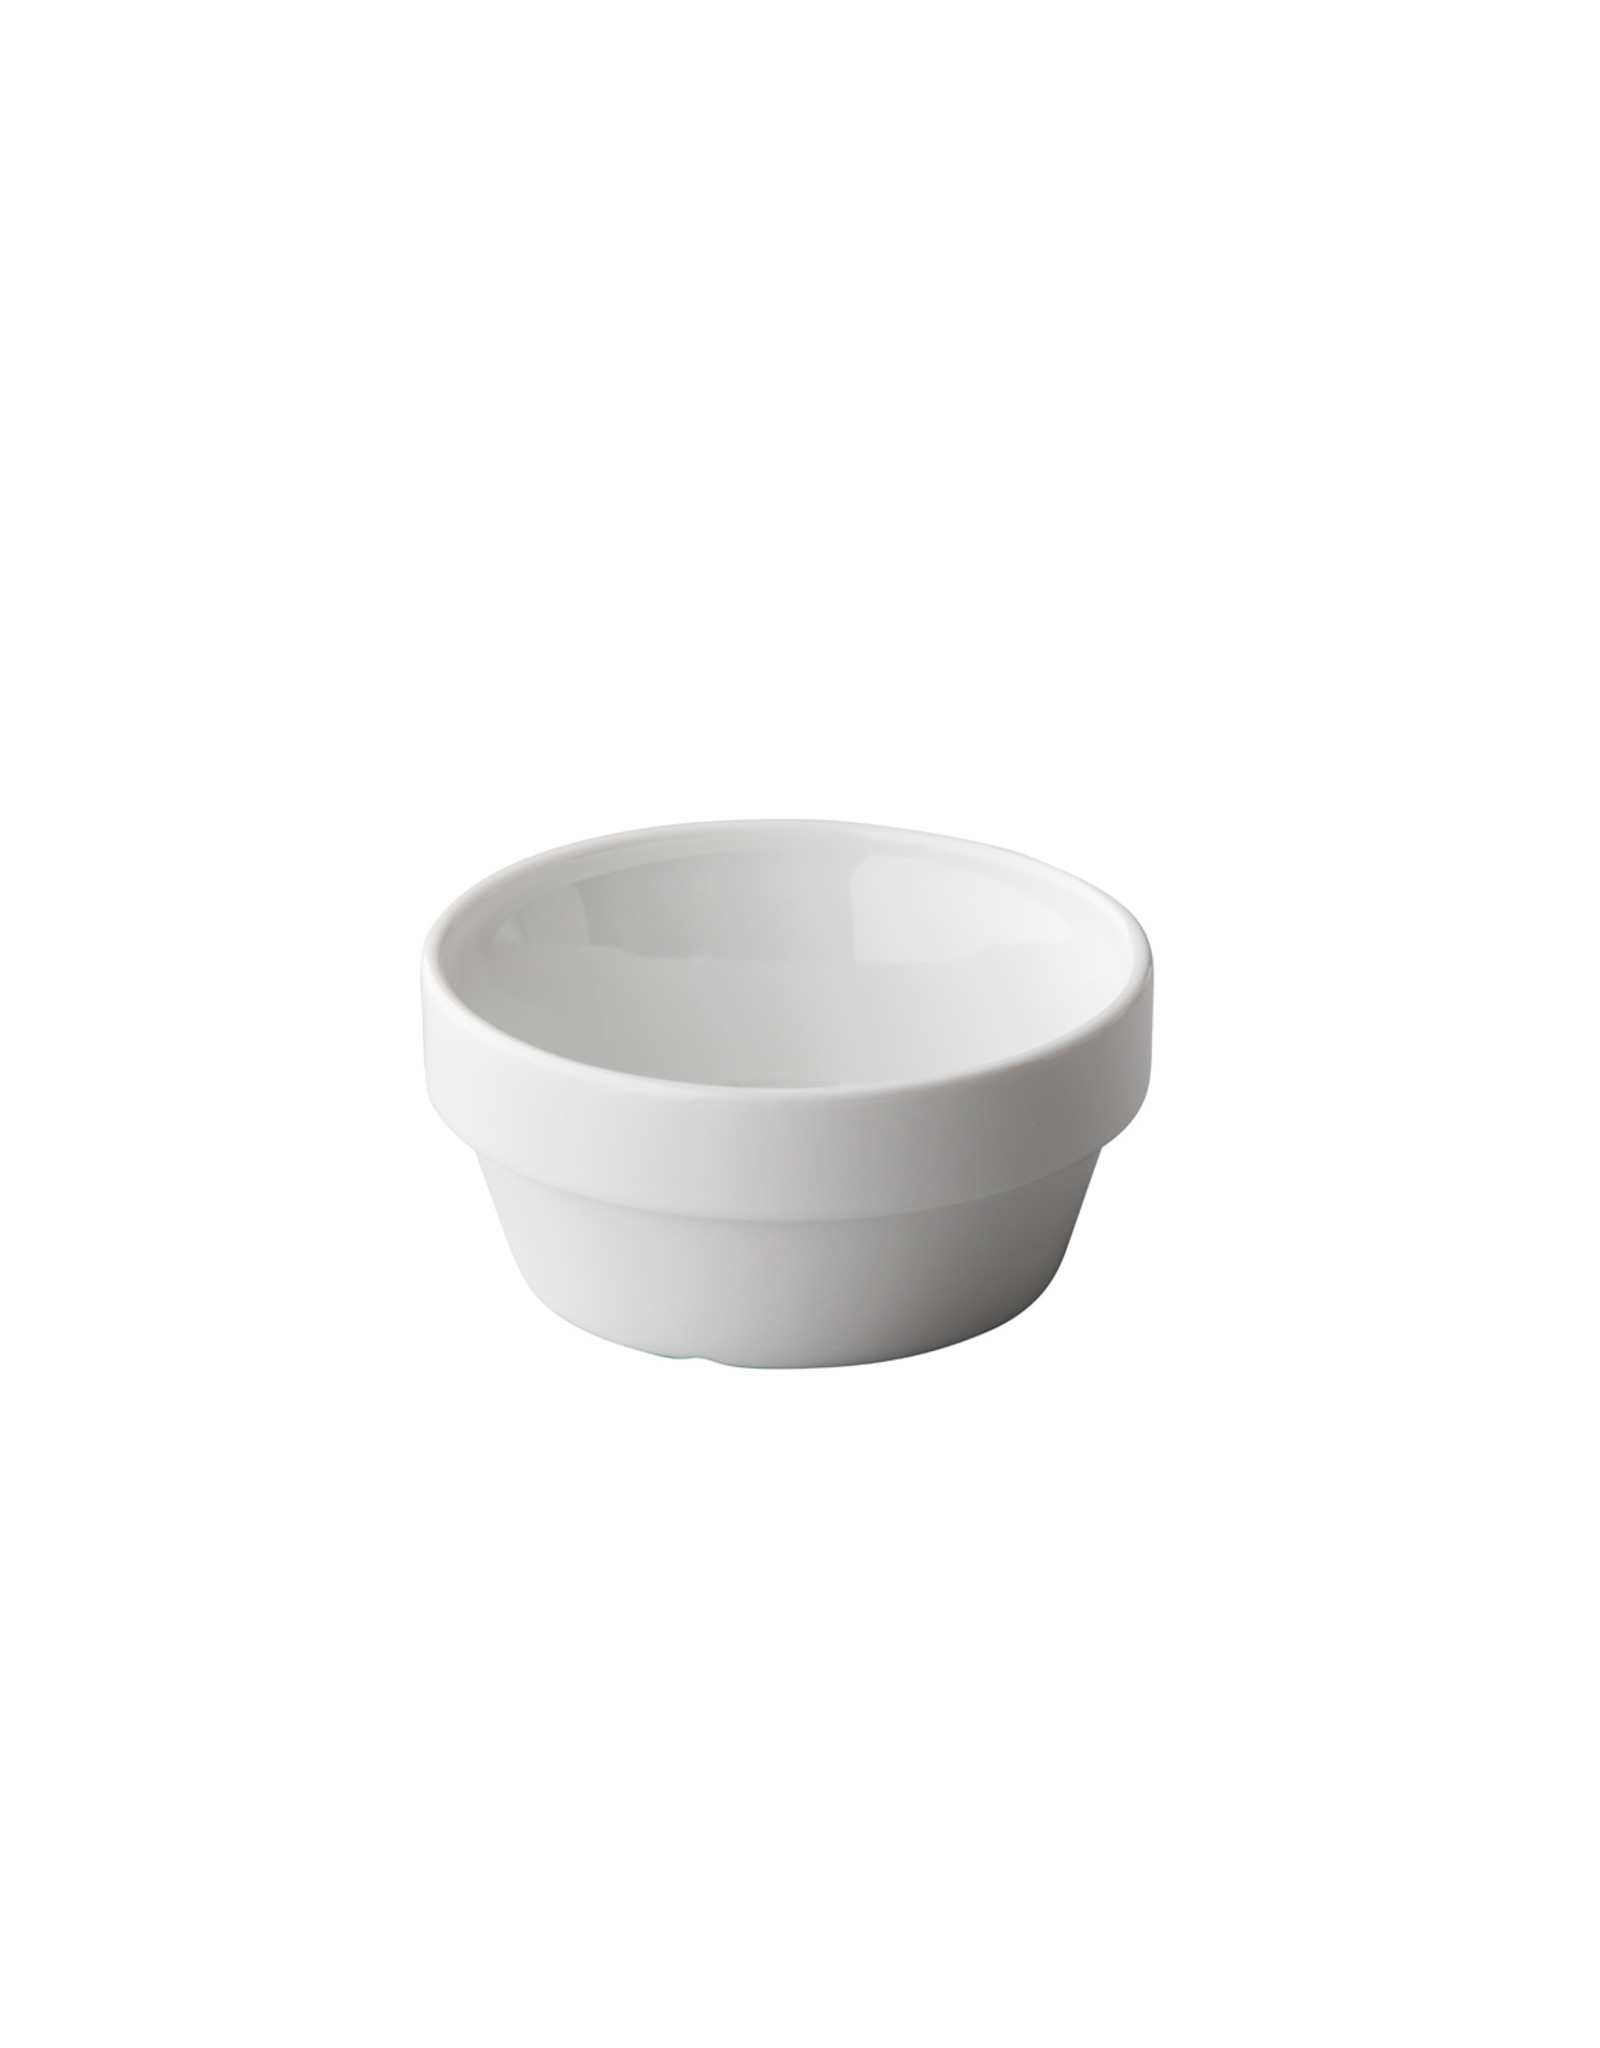 Stylepoint Q Basic Stackable Bowl 11cm